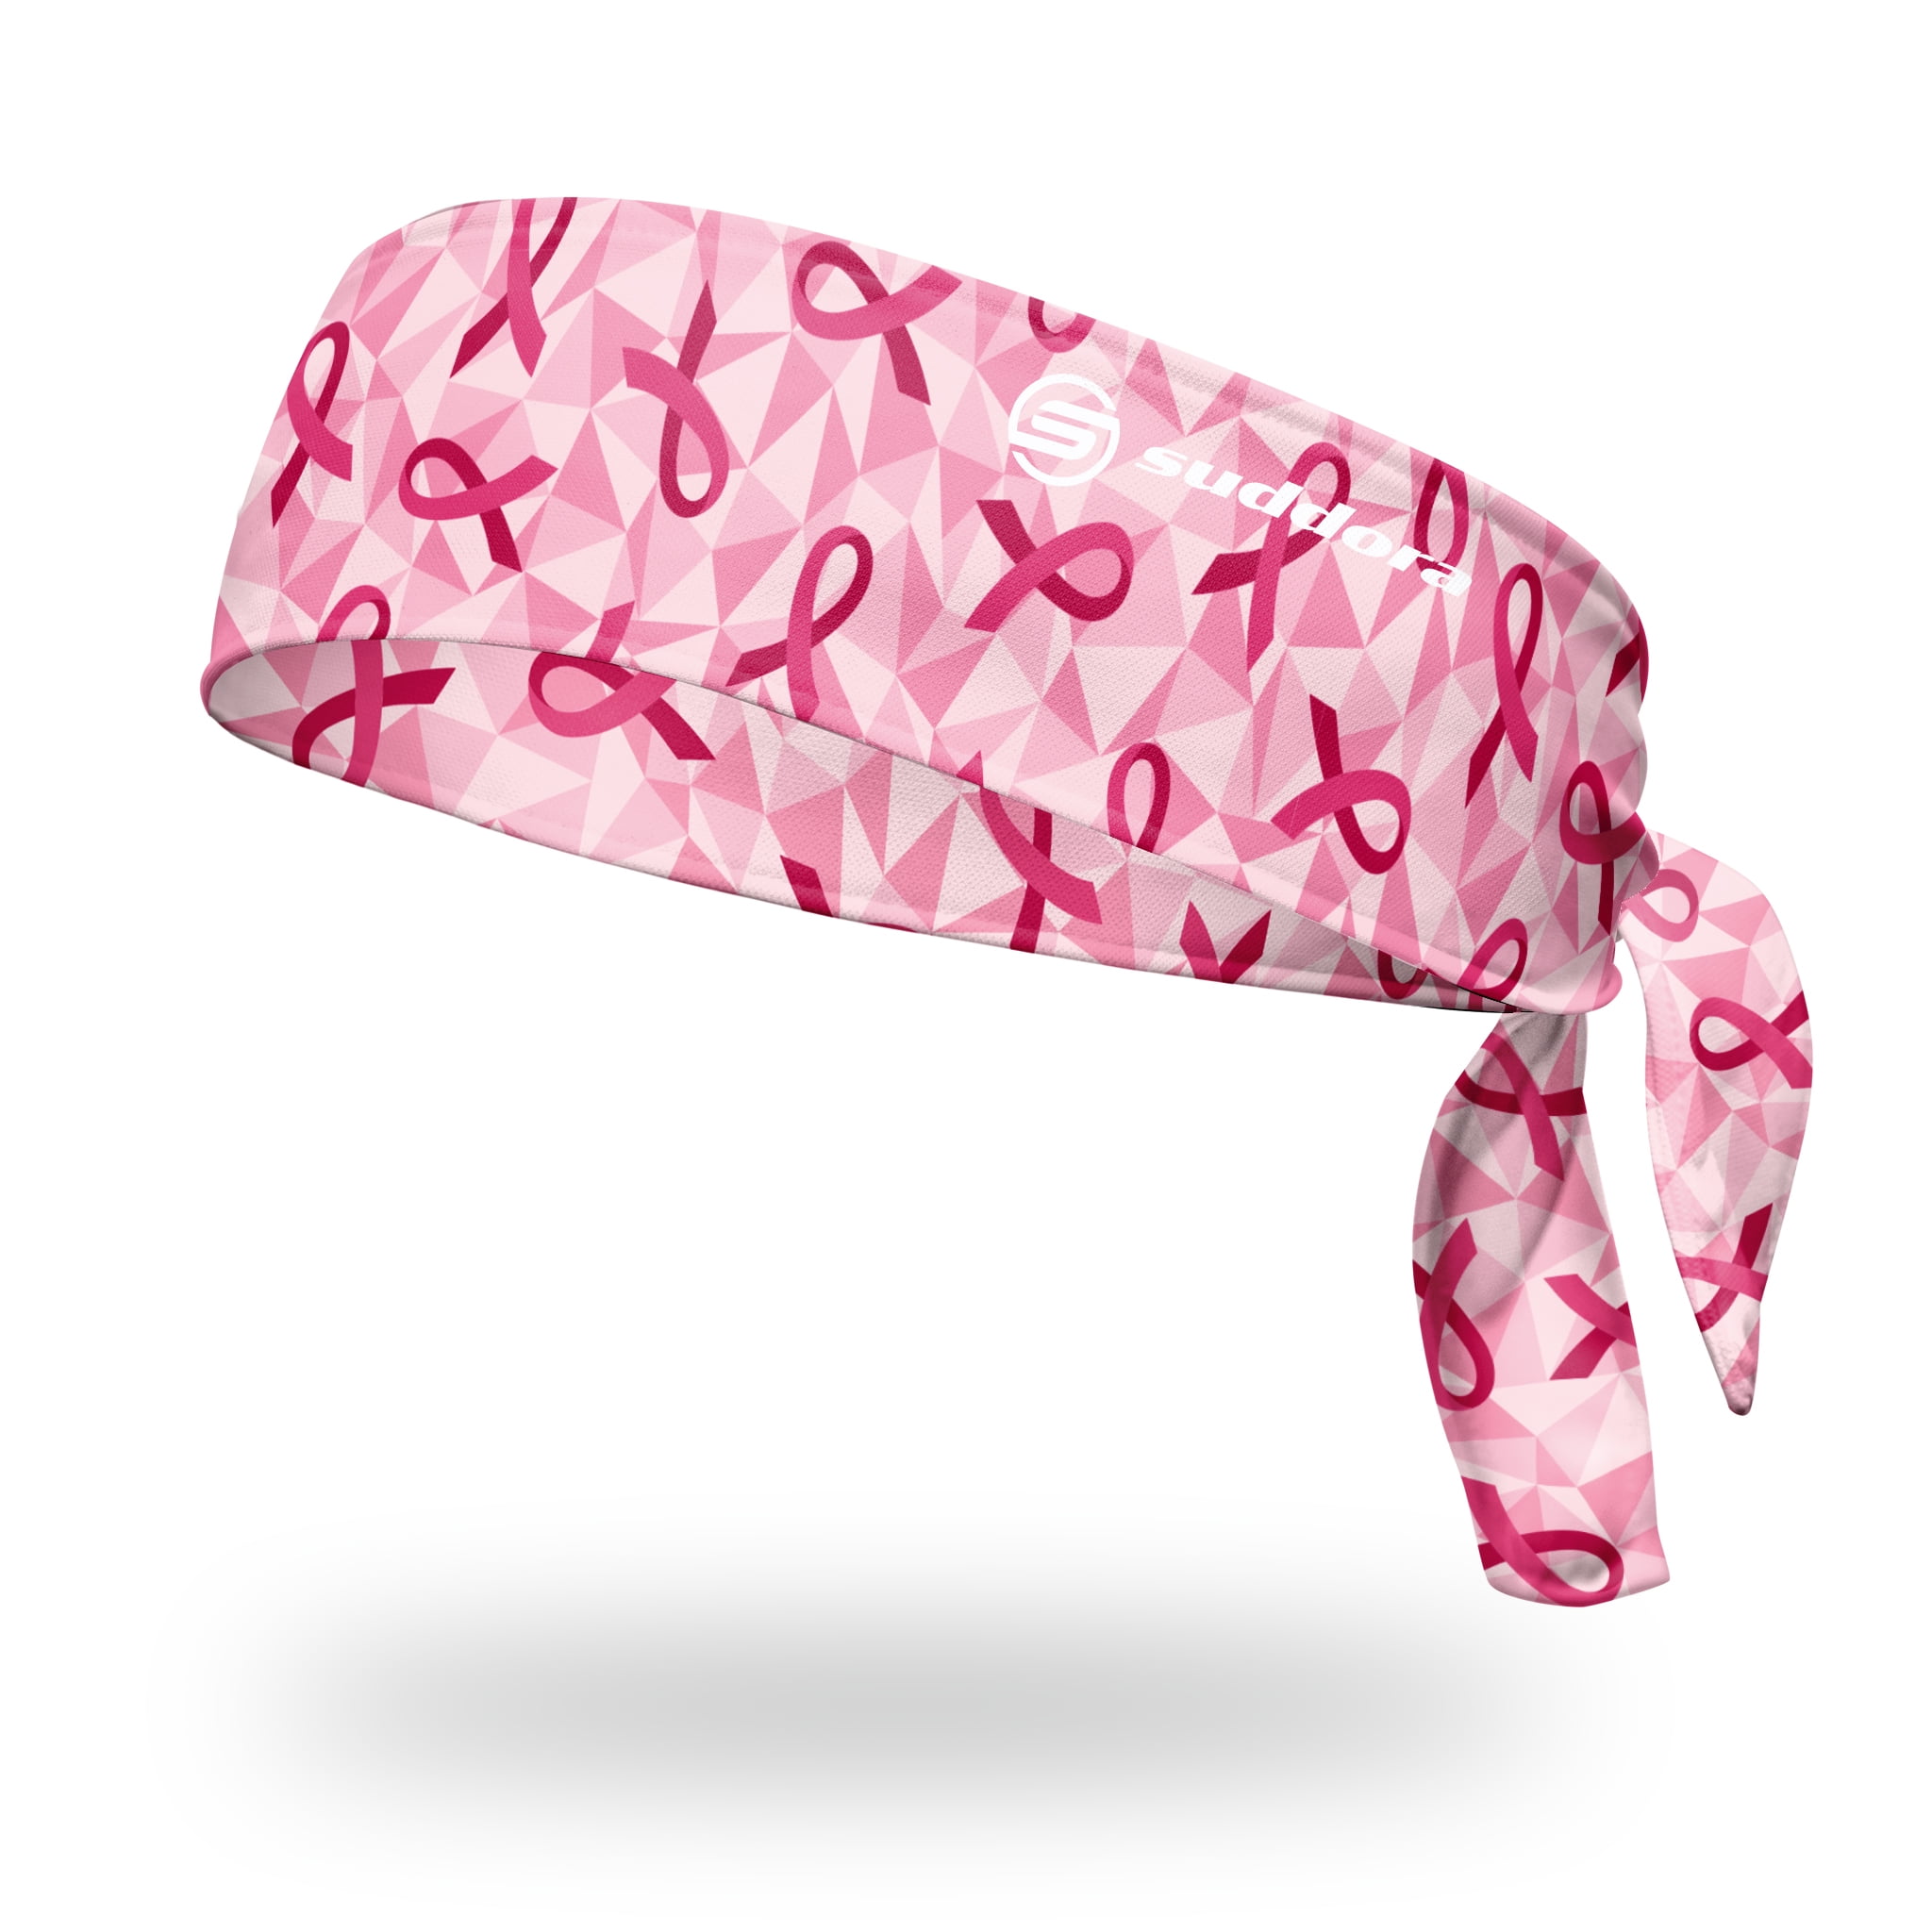 Gejoy 4 Pieces Breast Cancer Awareness Accessories Includes Pink Ribbon Sweatbands Headband Wristband for Exercise